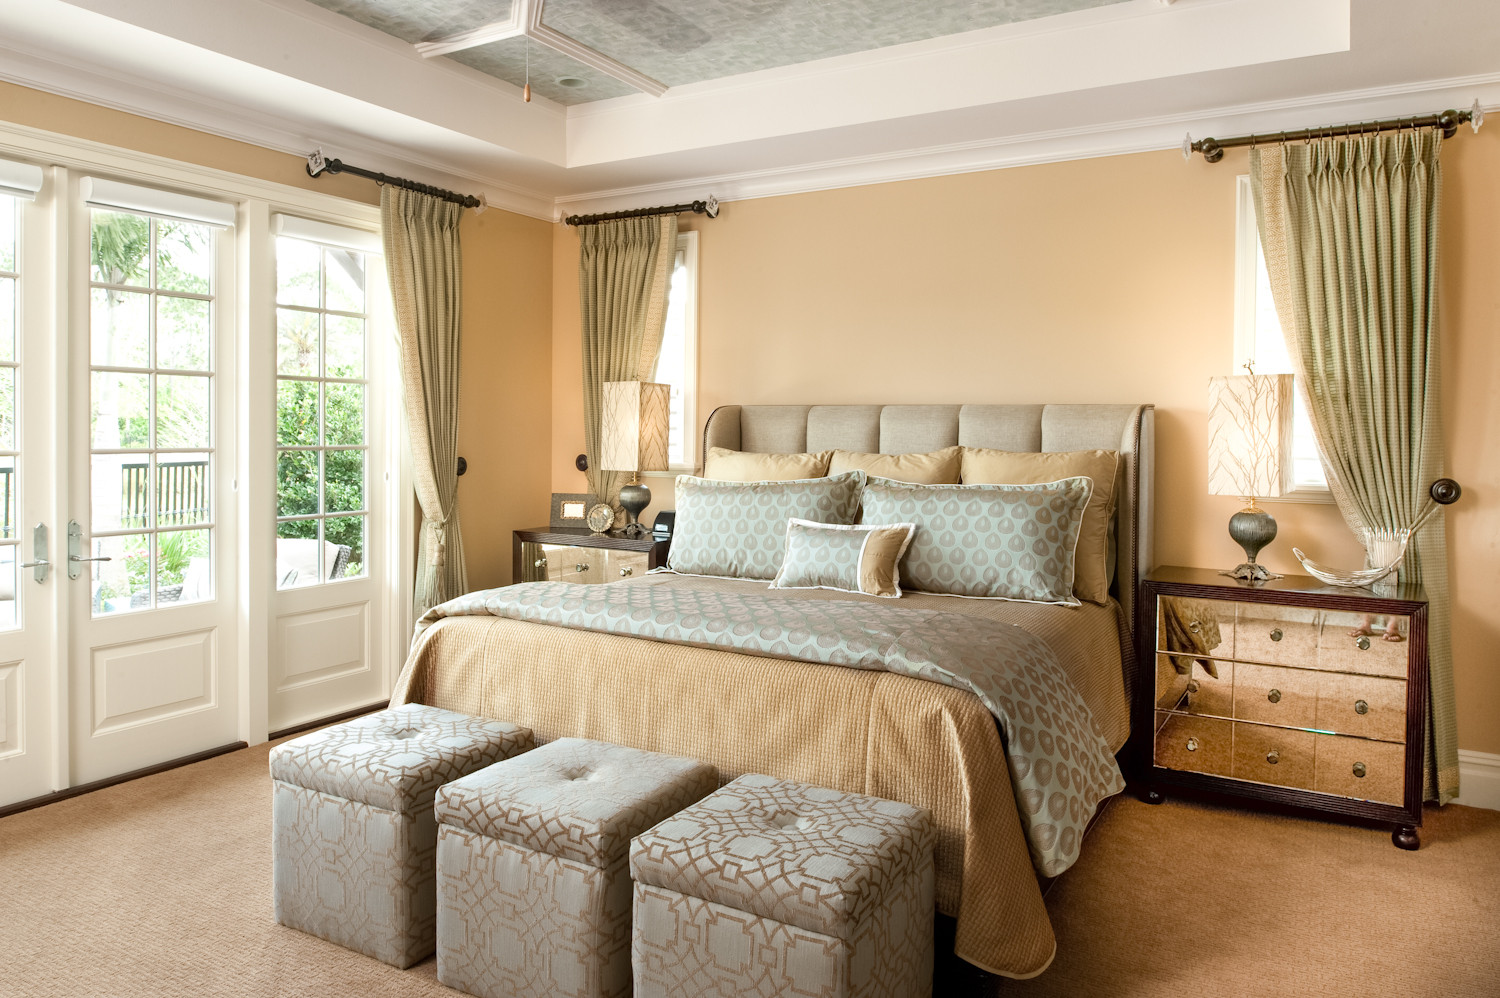 Master Bedroom Suite Ideas
 100 Master Bedroom Ideas Will Make You Feel Rich